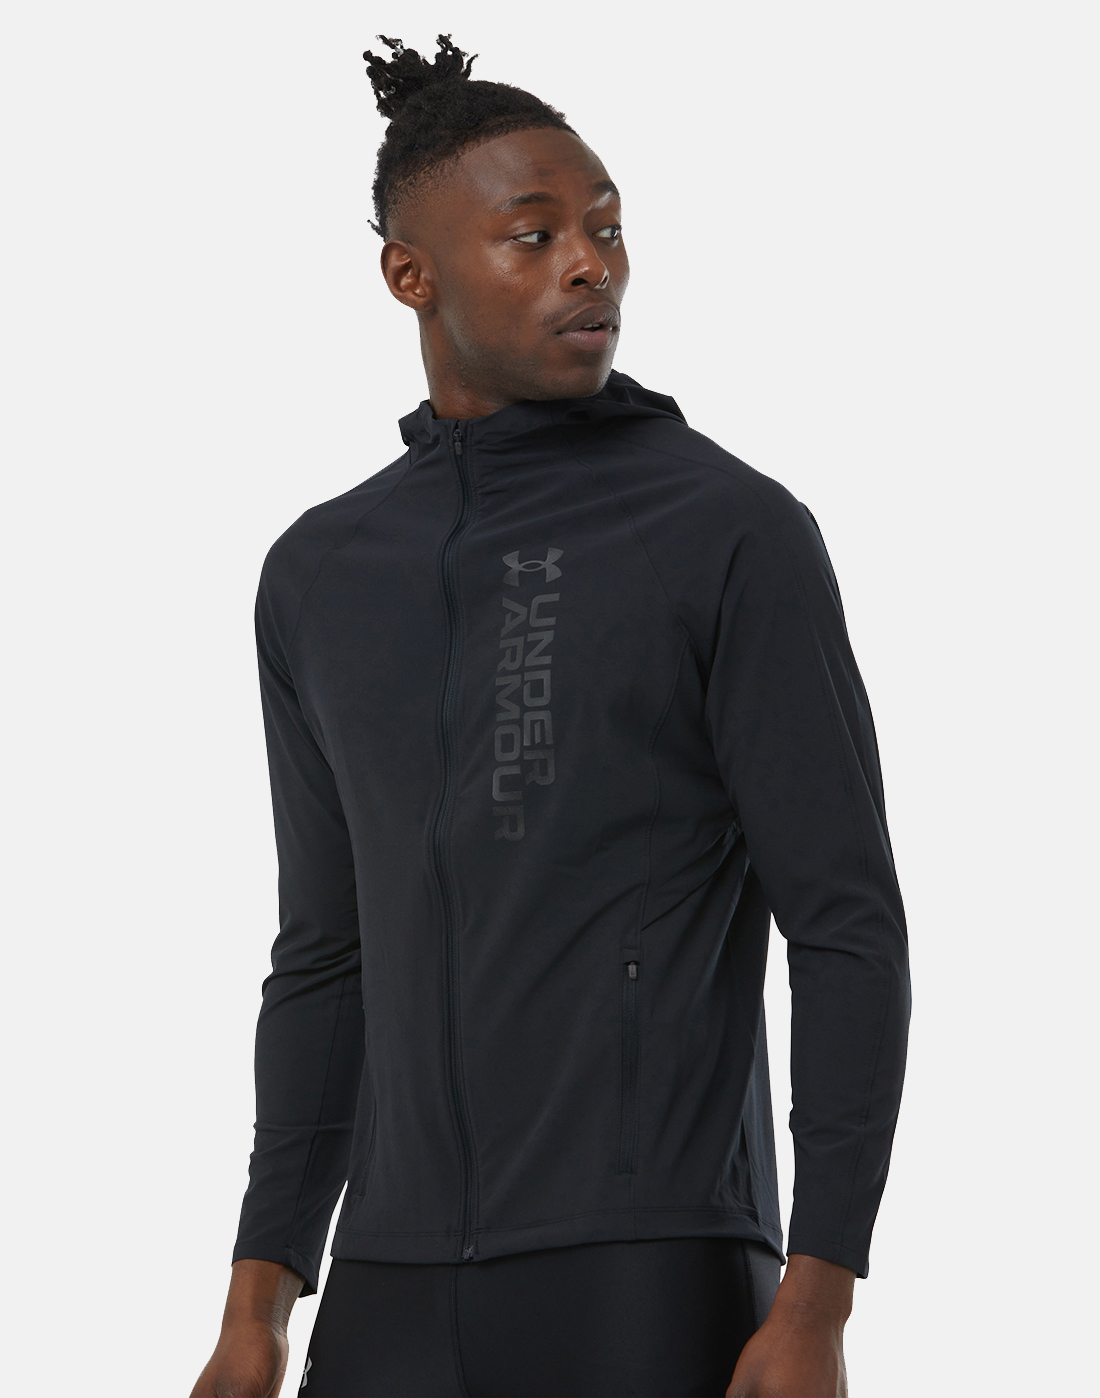 Under Armour Mens Outrun The Storm Jacket - Black